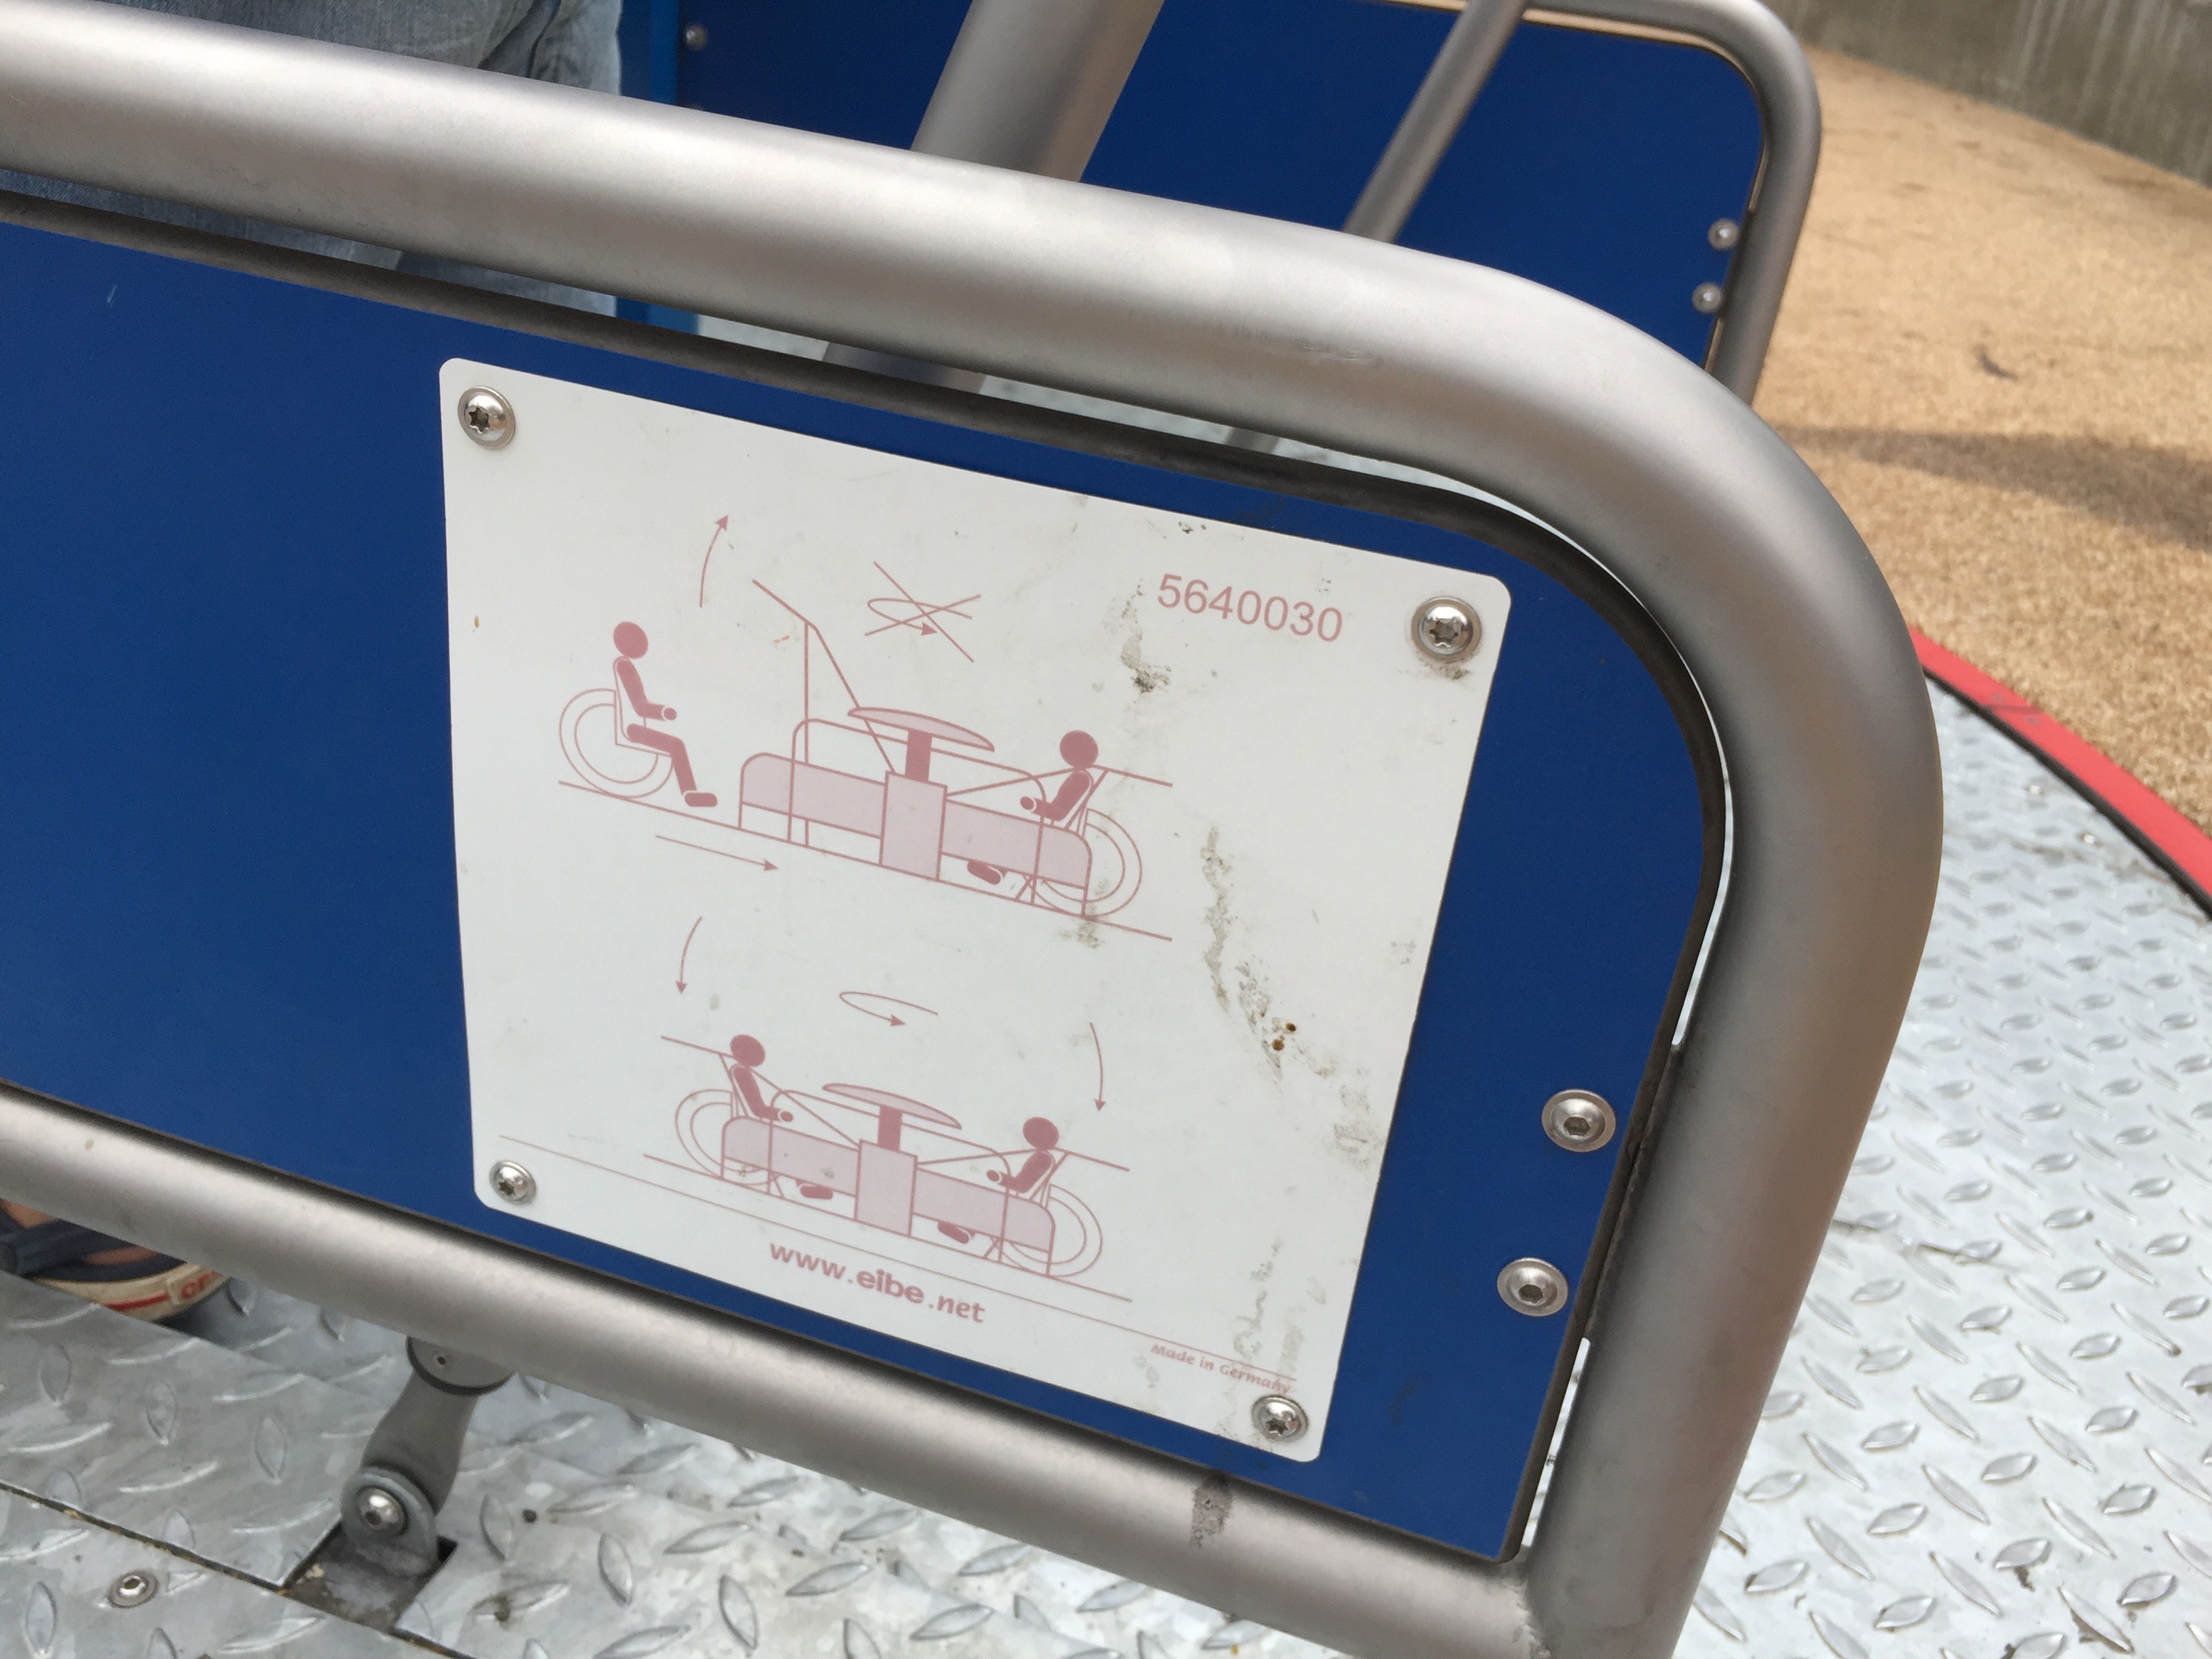 Diagram of the wheelchair accessible merry-go-round at the Paso Robles Downtown City Park Playground